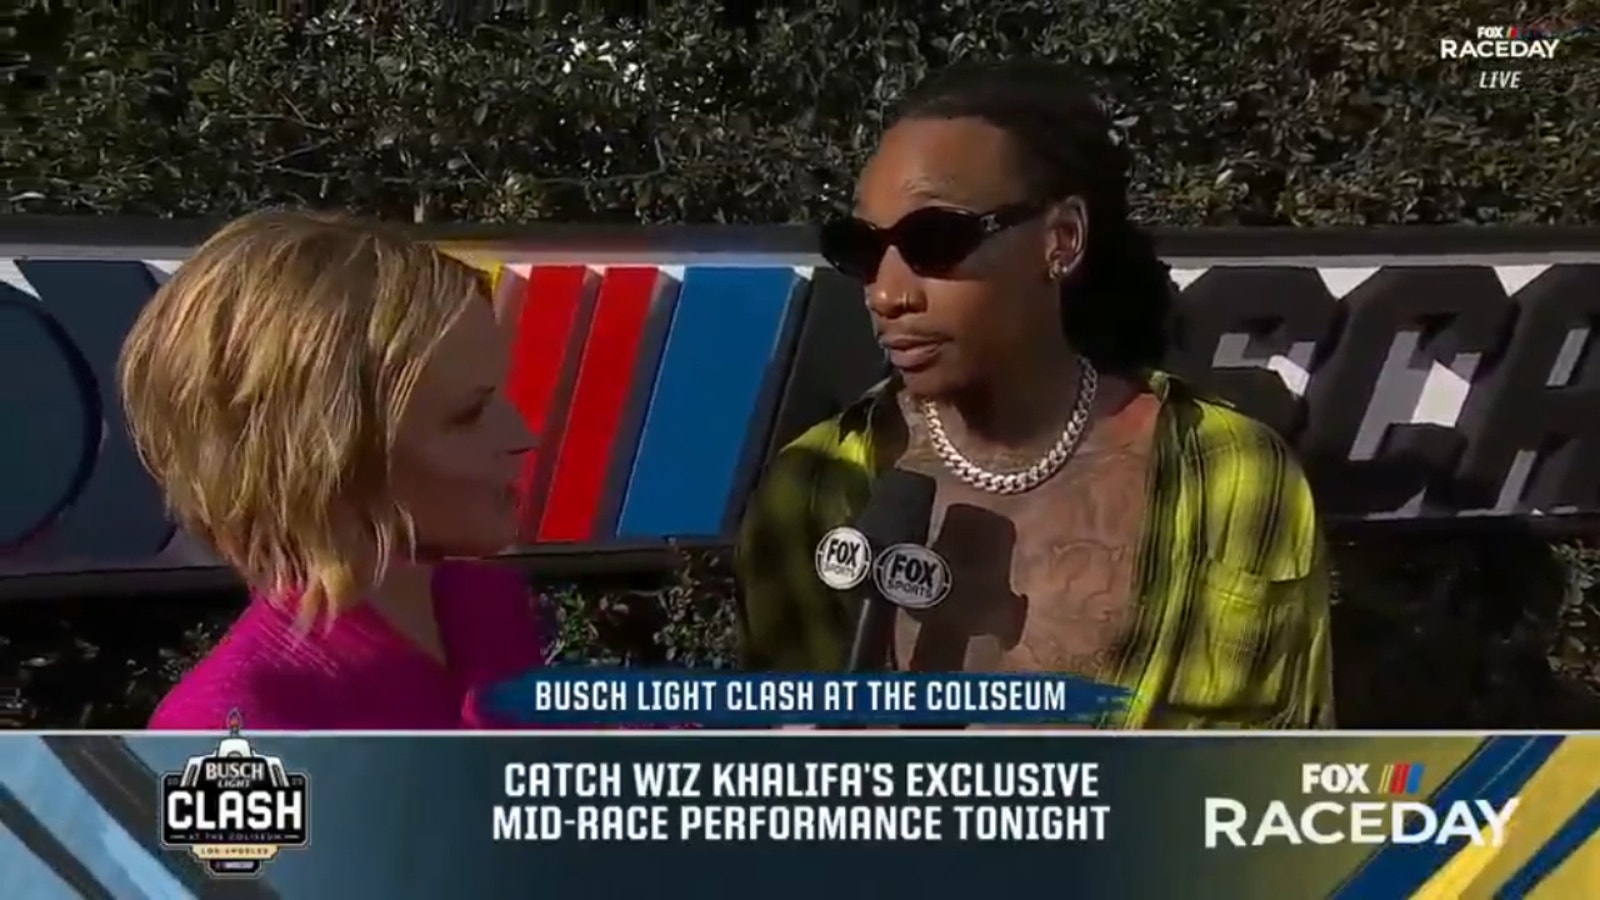 Wiz Khalifa in his mid-race performance at NASCAR's Clash at the Coliseum